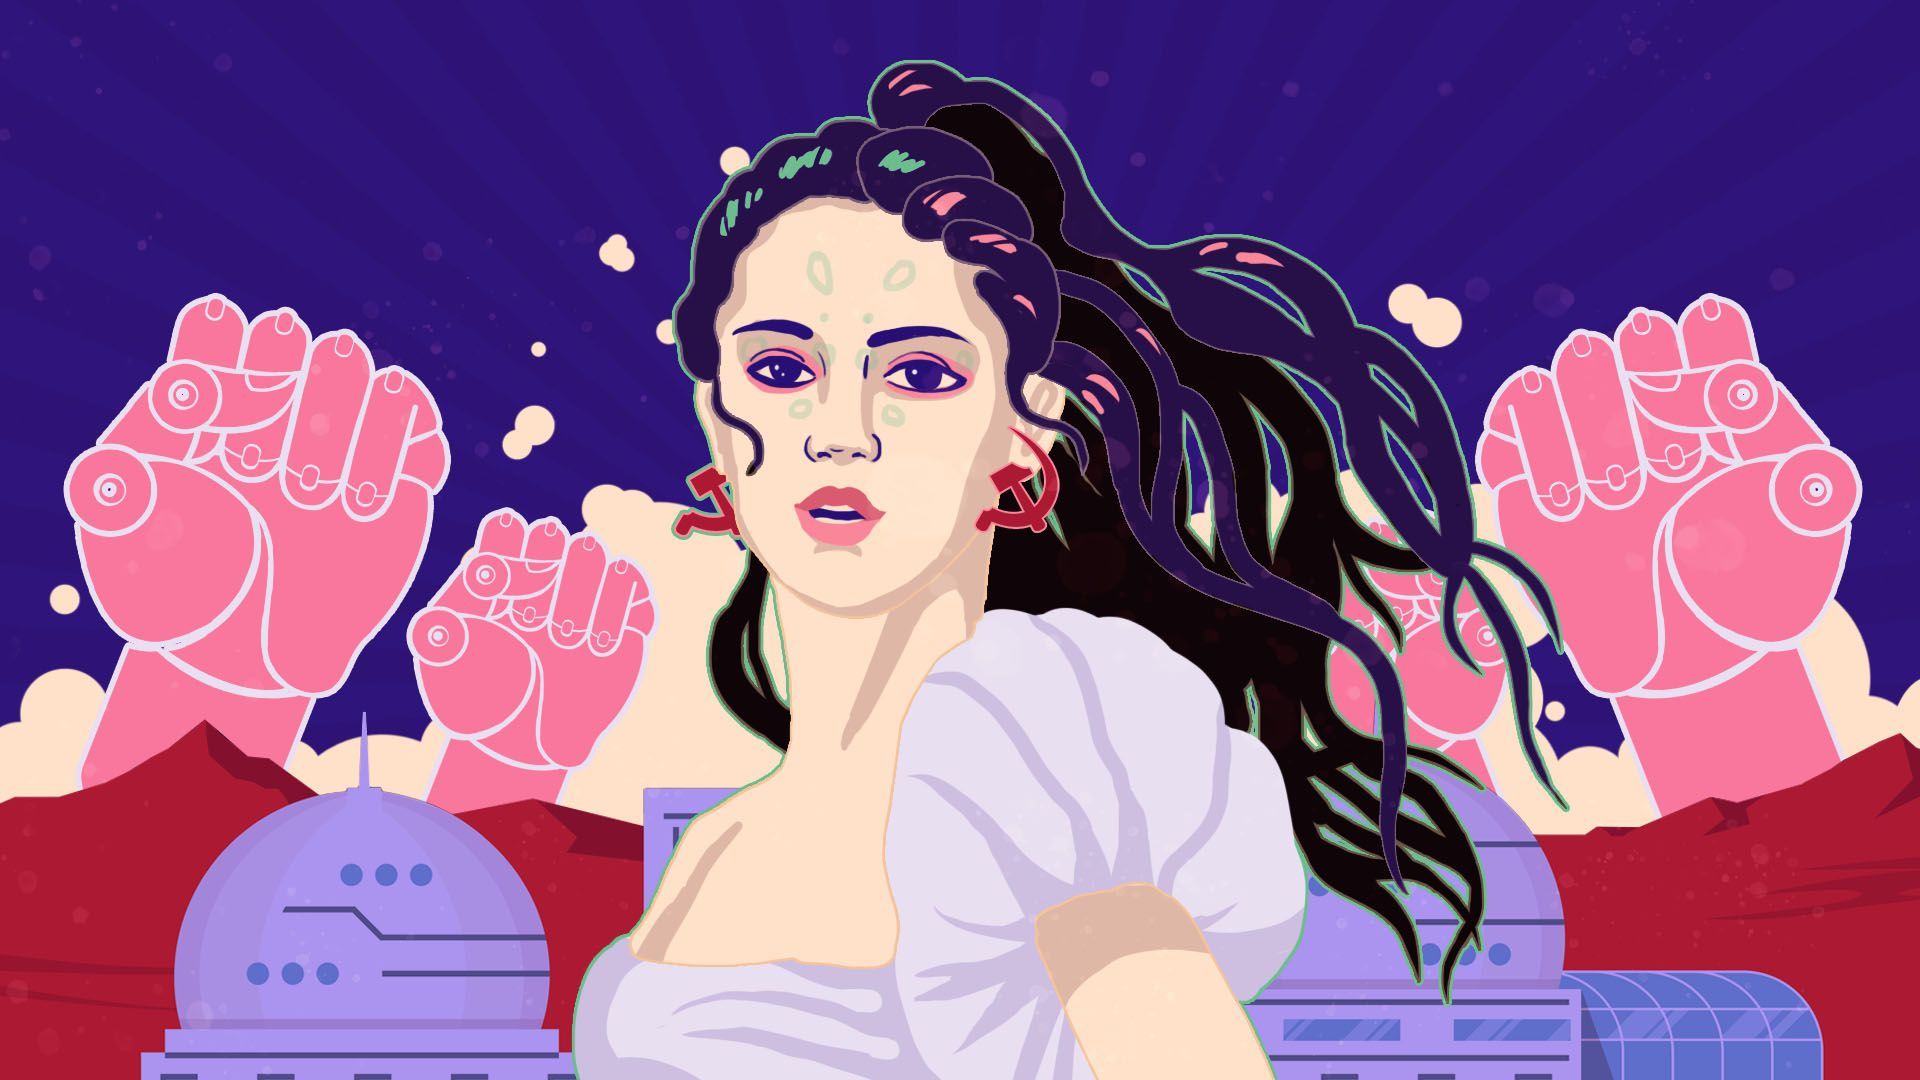 Illustration of the singer Grimes in a Soviet-style poster with a Mars colony behind her and raised robot fists